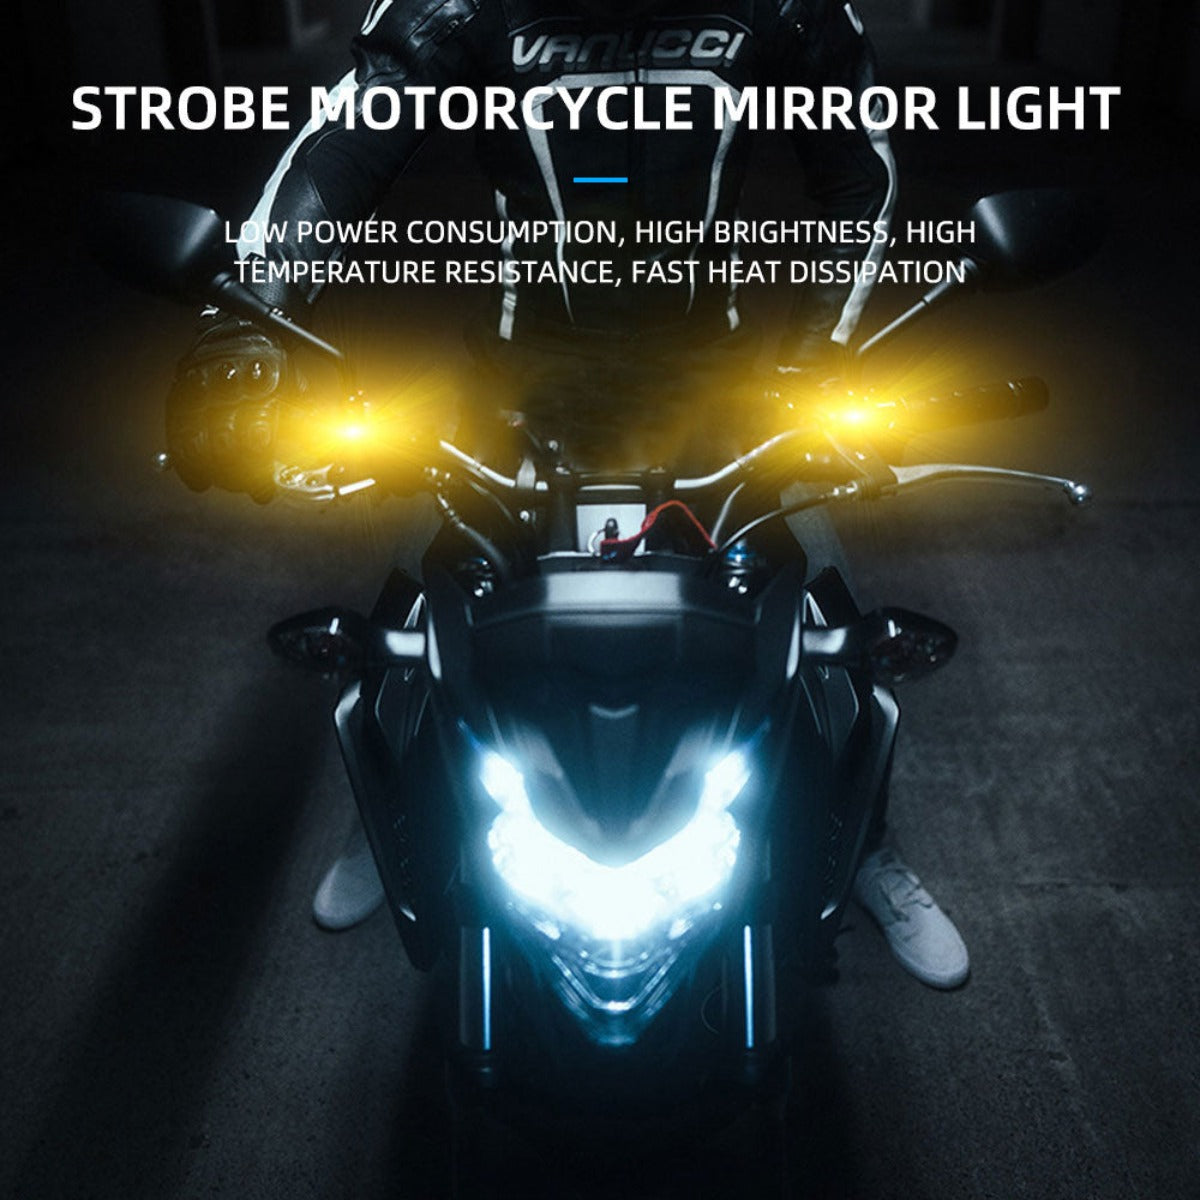 Enhance motorcycle safety with Motorcycle Strobe LED Driving Lights for increased visibility.